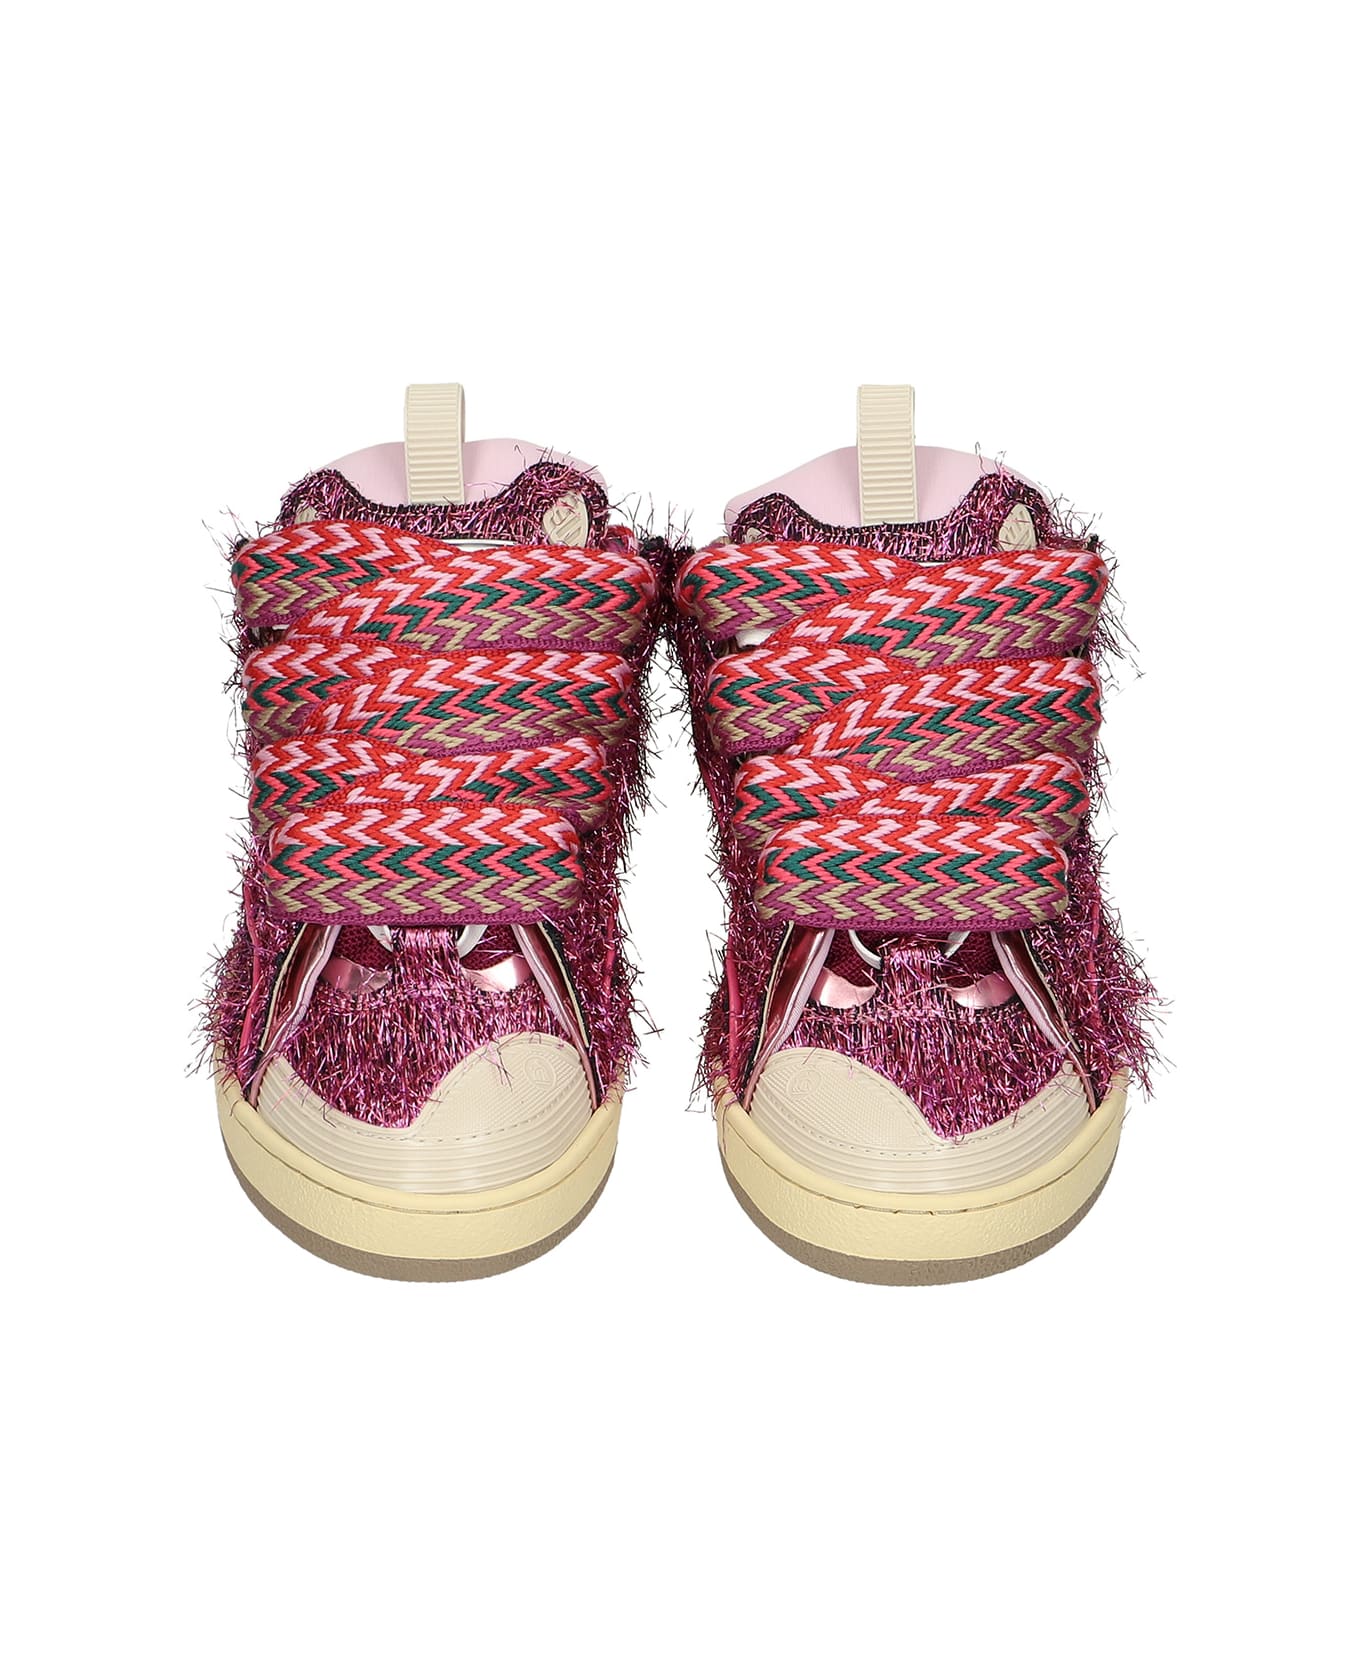 Lanvin Curb Sneakers In Rose-pink Synthetic Fibers - rose-pink